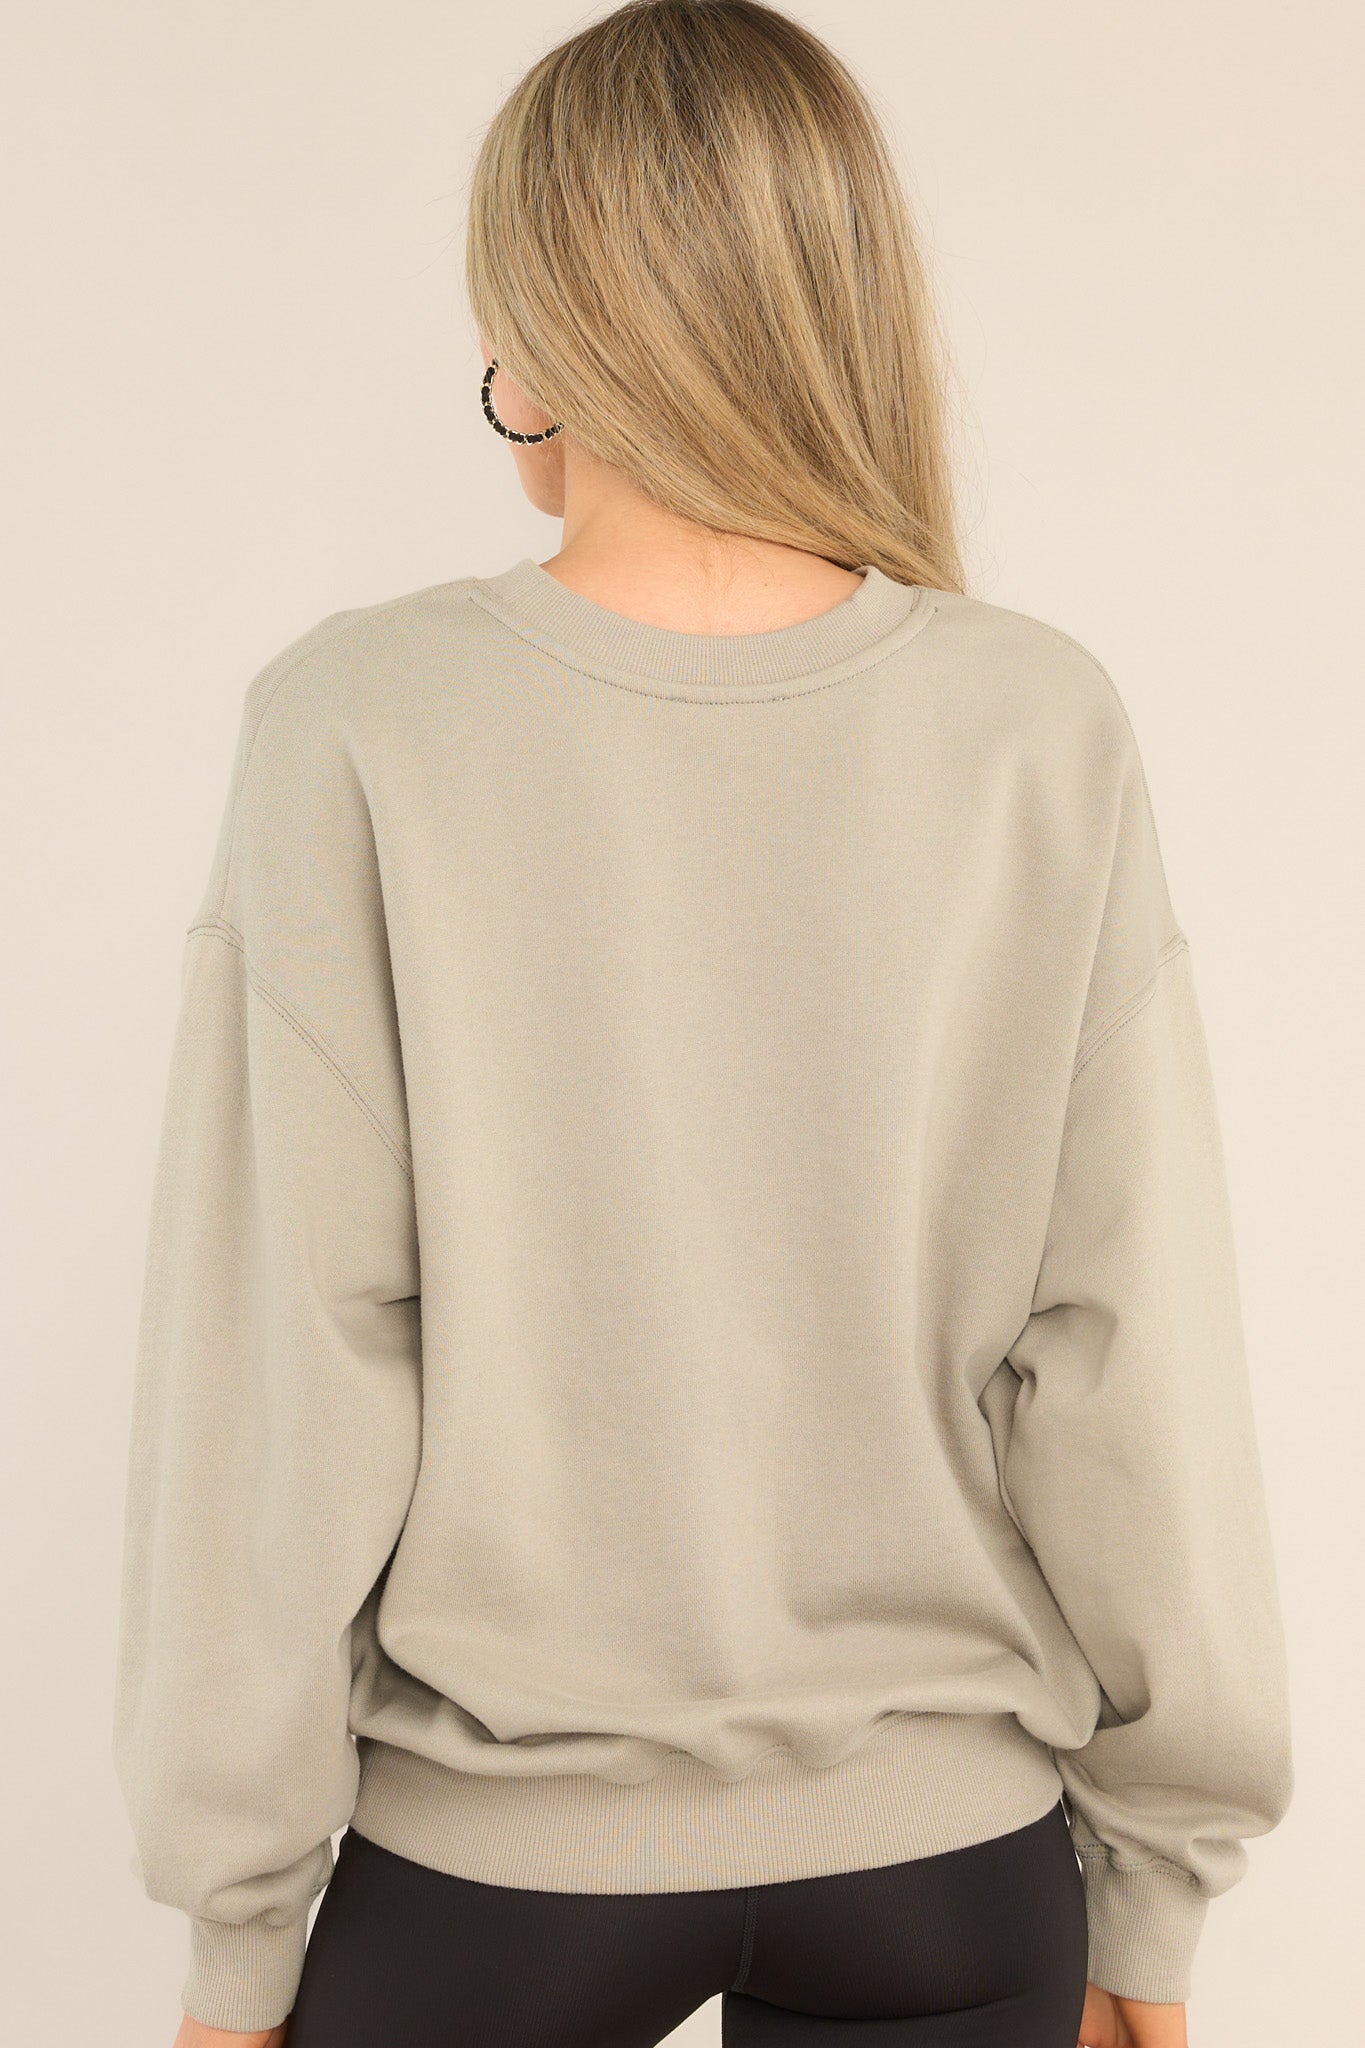 Back view of this sweatshirt that features a ribbed crew neckline, dropped shoulders, a Zion graphic, ribbed cuffed long sleeves, and a ribbed hemline.